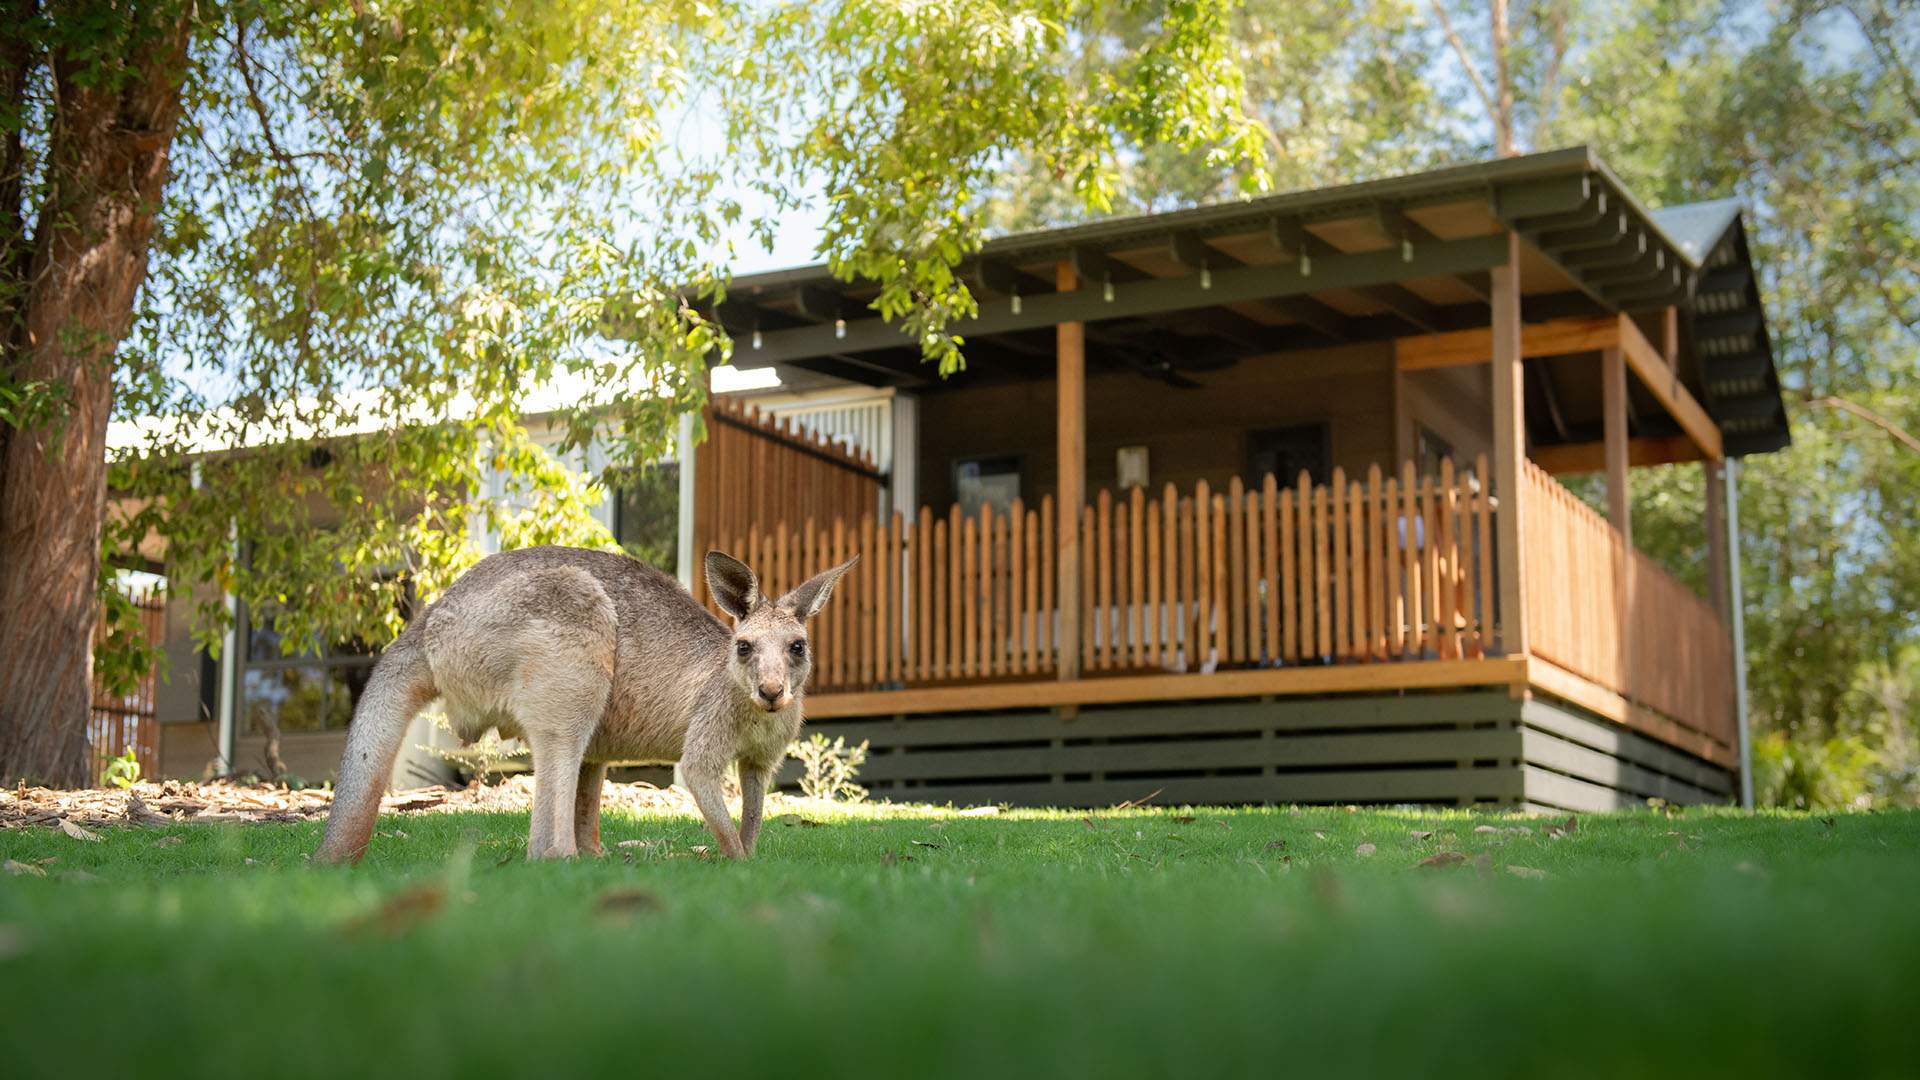 Australia Zoo Has Expanded Its Overnight Stays Among the Animals with New One-Bedroom Cabins